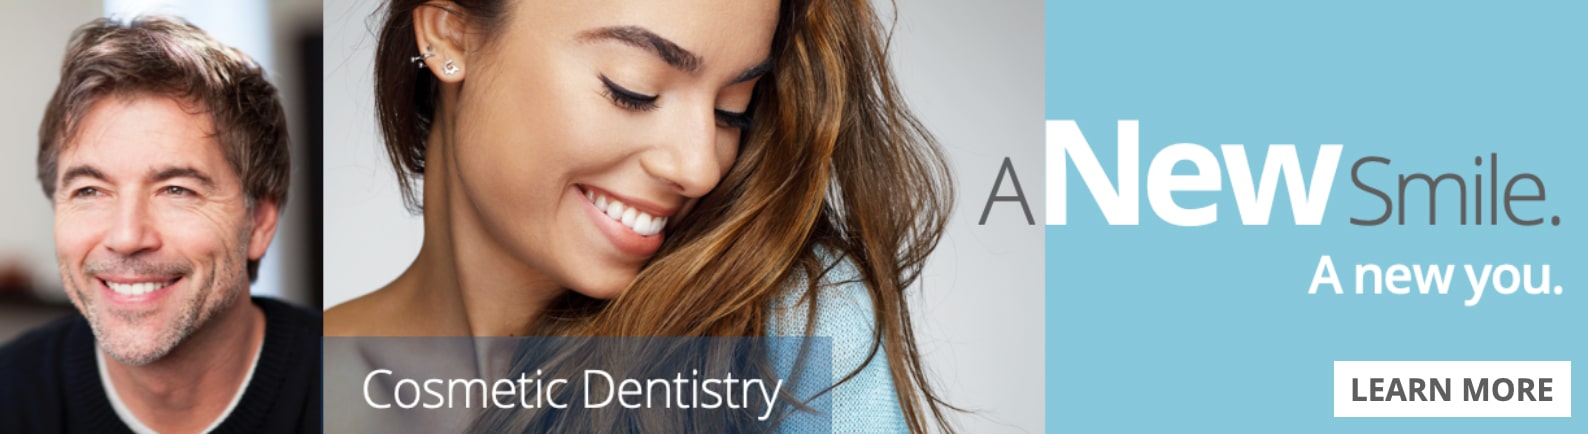 cosmetic dentistry banner - learn more